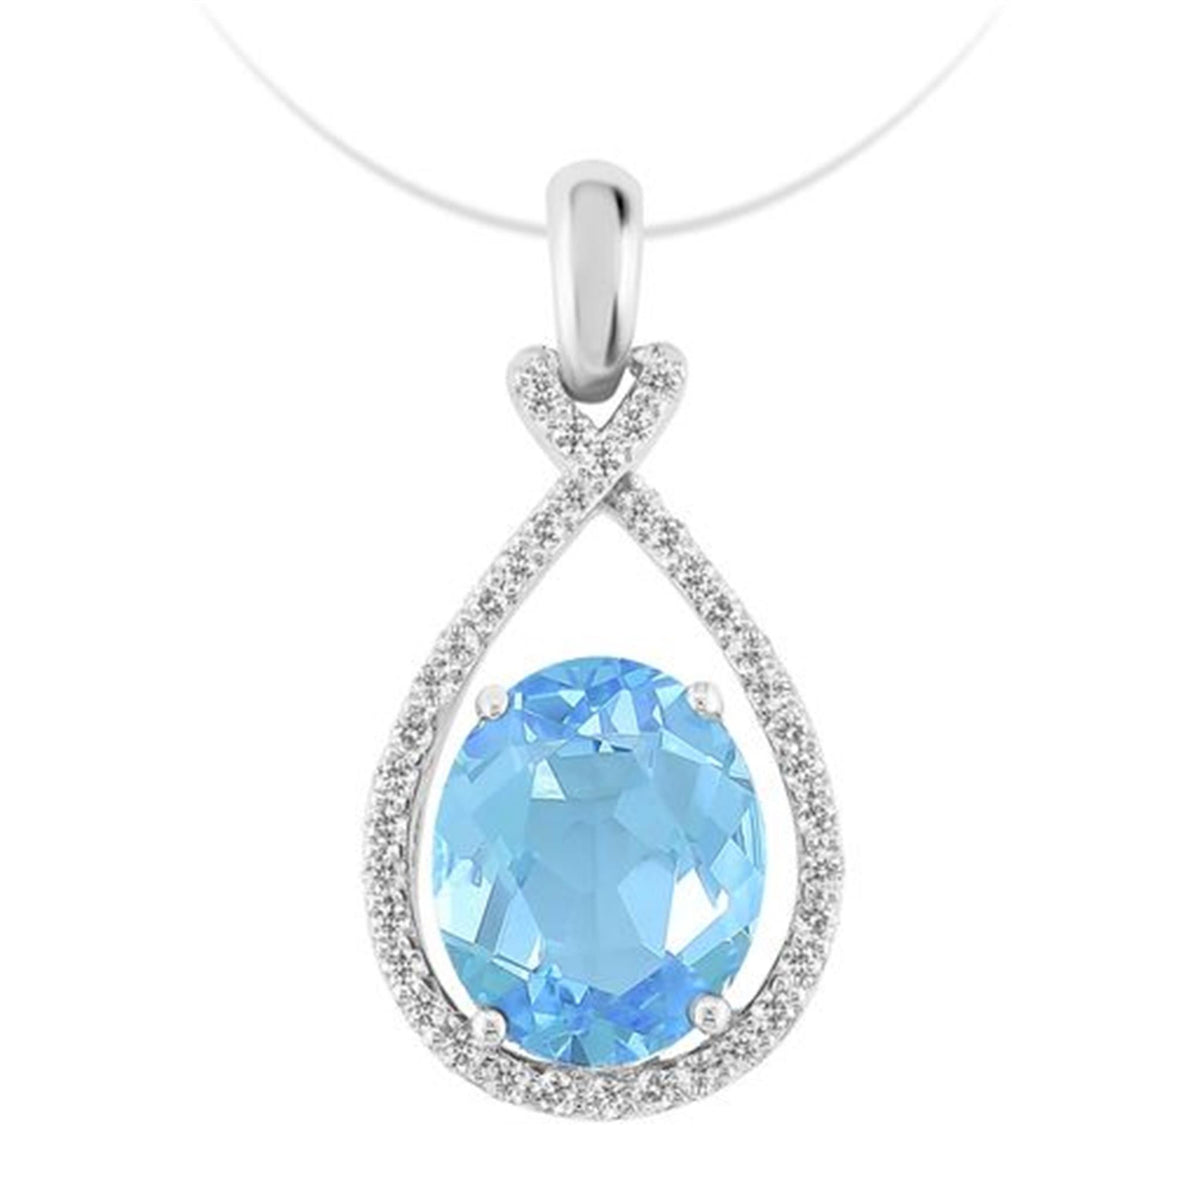 14Kt White Gold Contemporary Gemstone Pendant With 4.39ct Blue Topaz